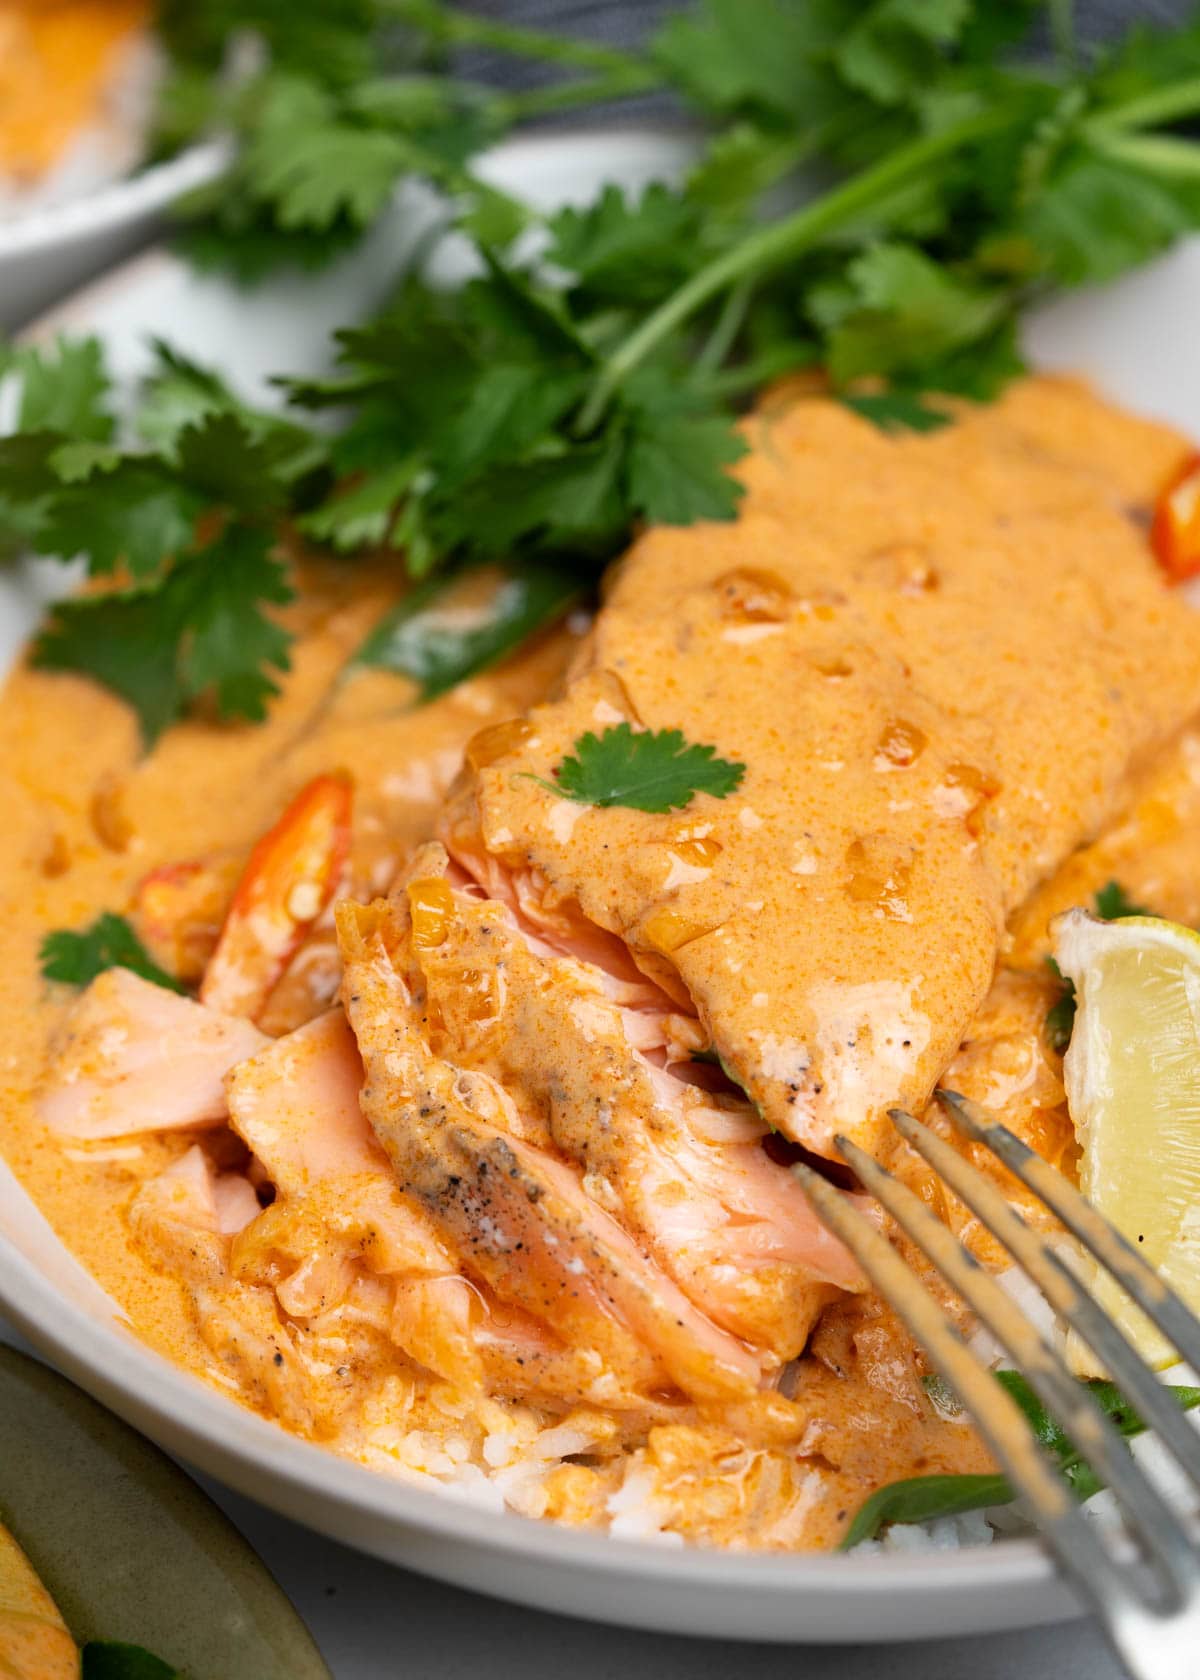 Salmon fillets properly seasoned result in tender meat as shown when pinched with a fork. Fillets are served on rice and with a creamy curry sauce.